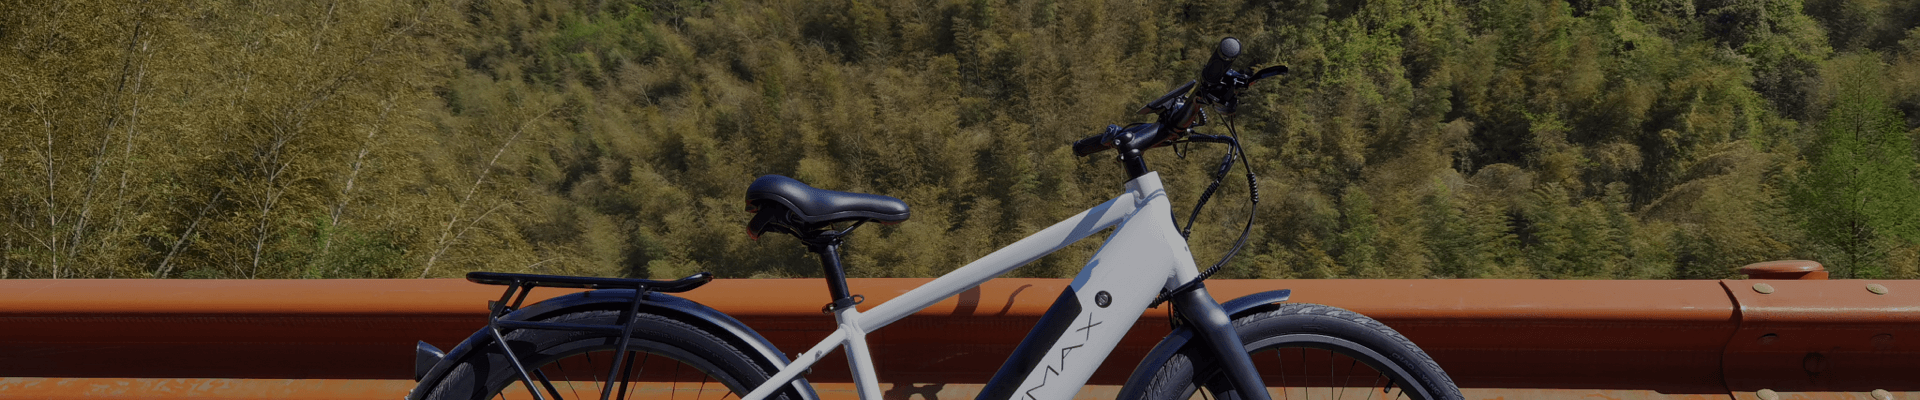 Comfortable Road bicycle, Electric city bike for city commute